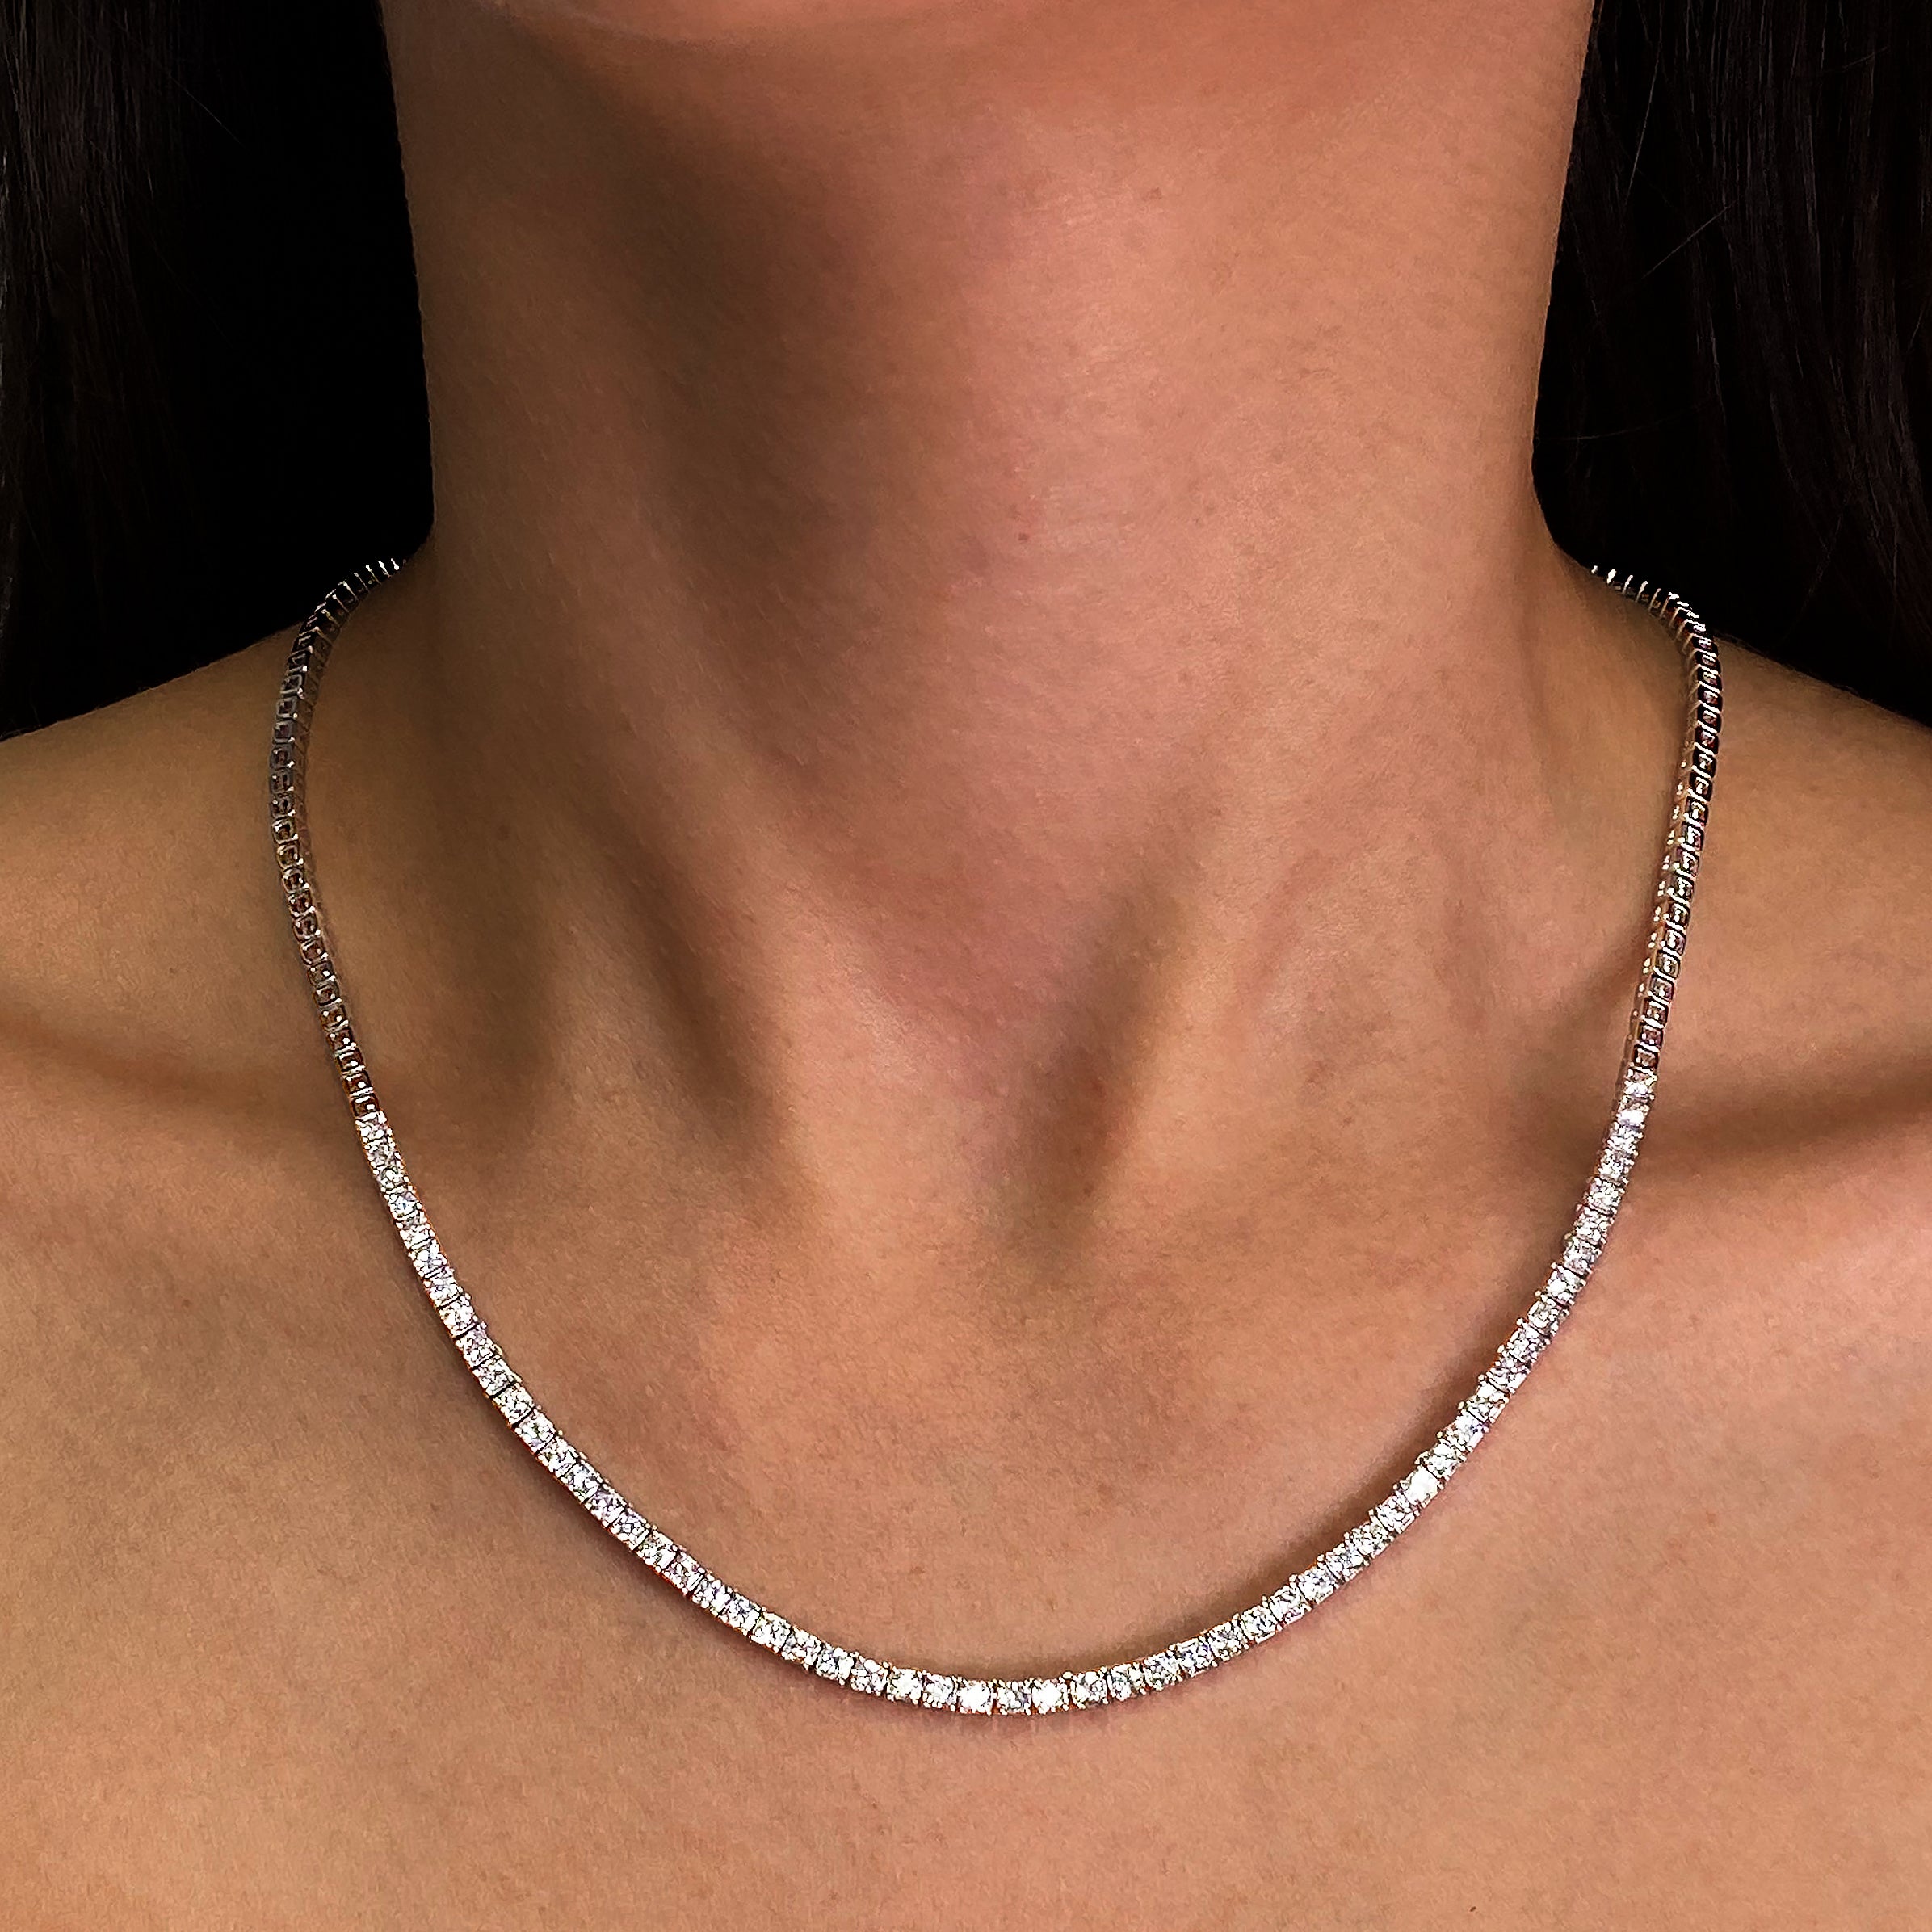 Shimansky - Women Wearing the My Girl Diamond Tennis Necklace 4.97ct Crafted in 18K White Gold